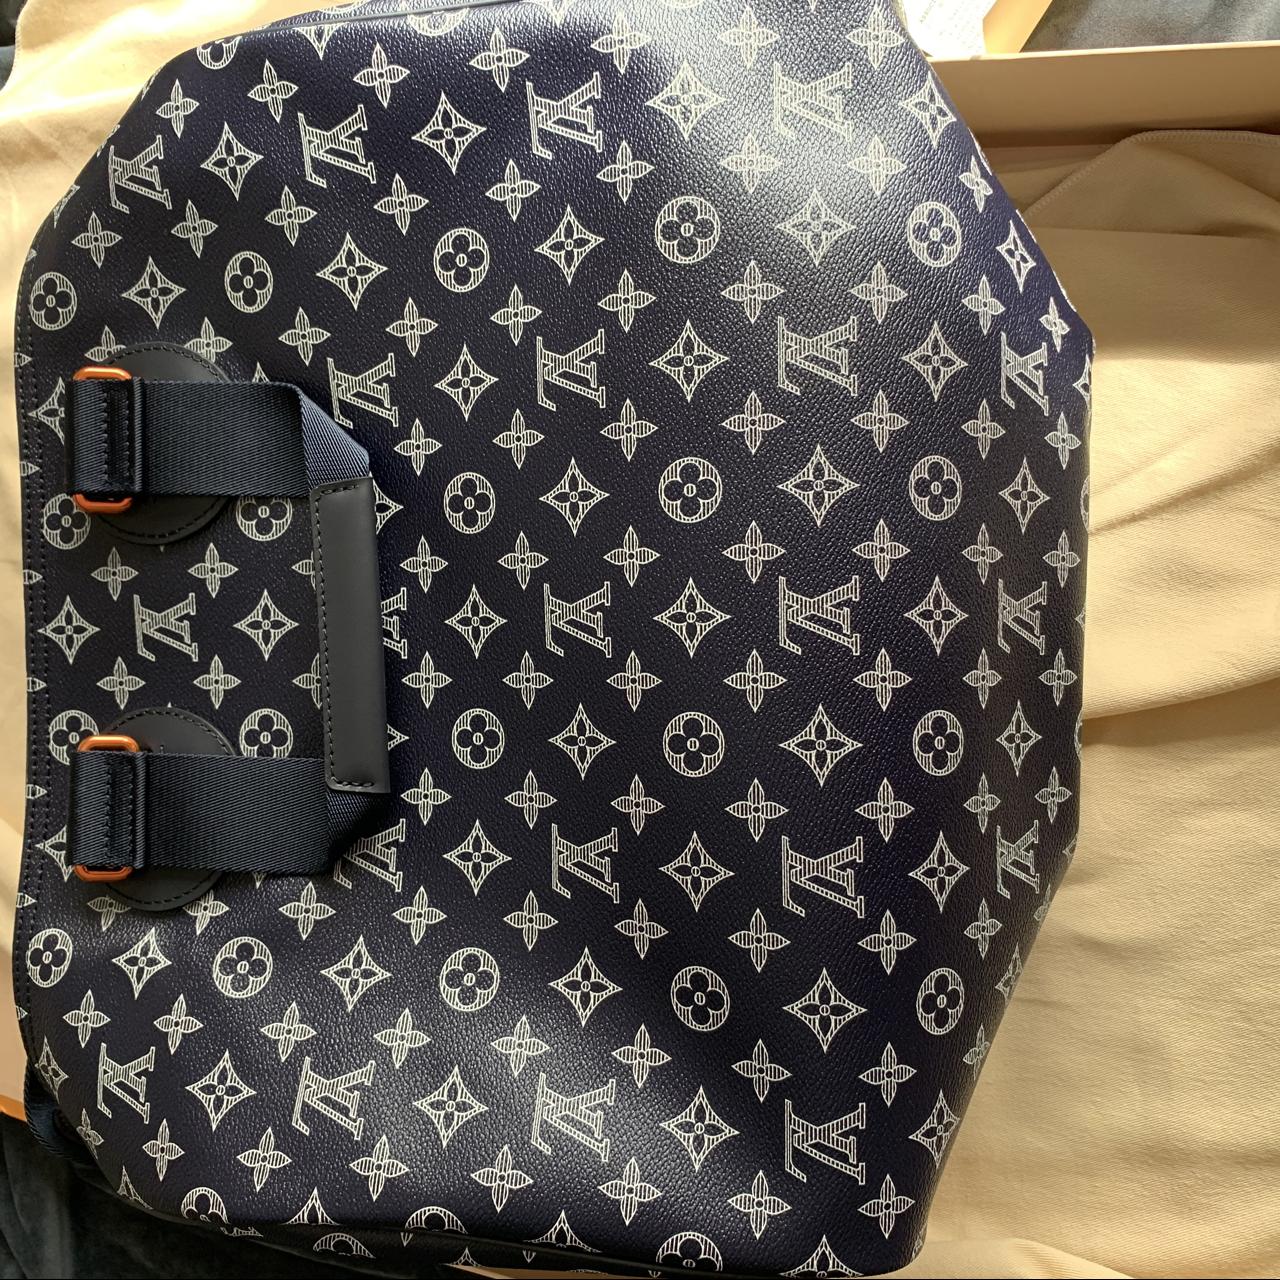 VERY OLD LV SIDE BAG CAN BE USED TO MAKE SOMETHING - Depop